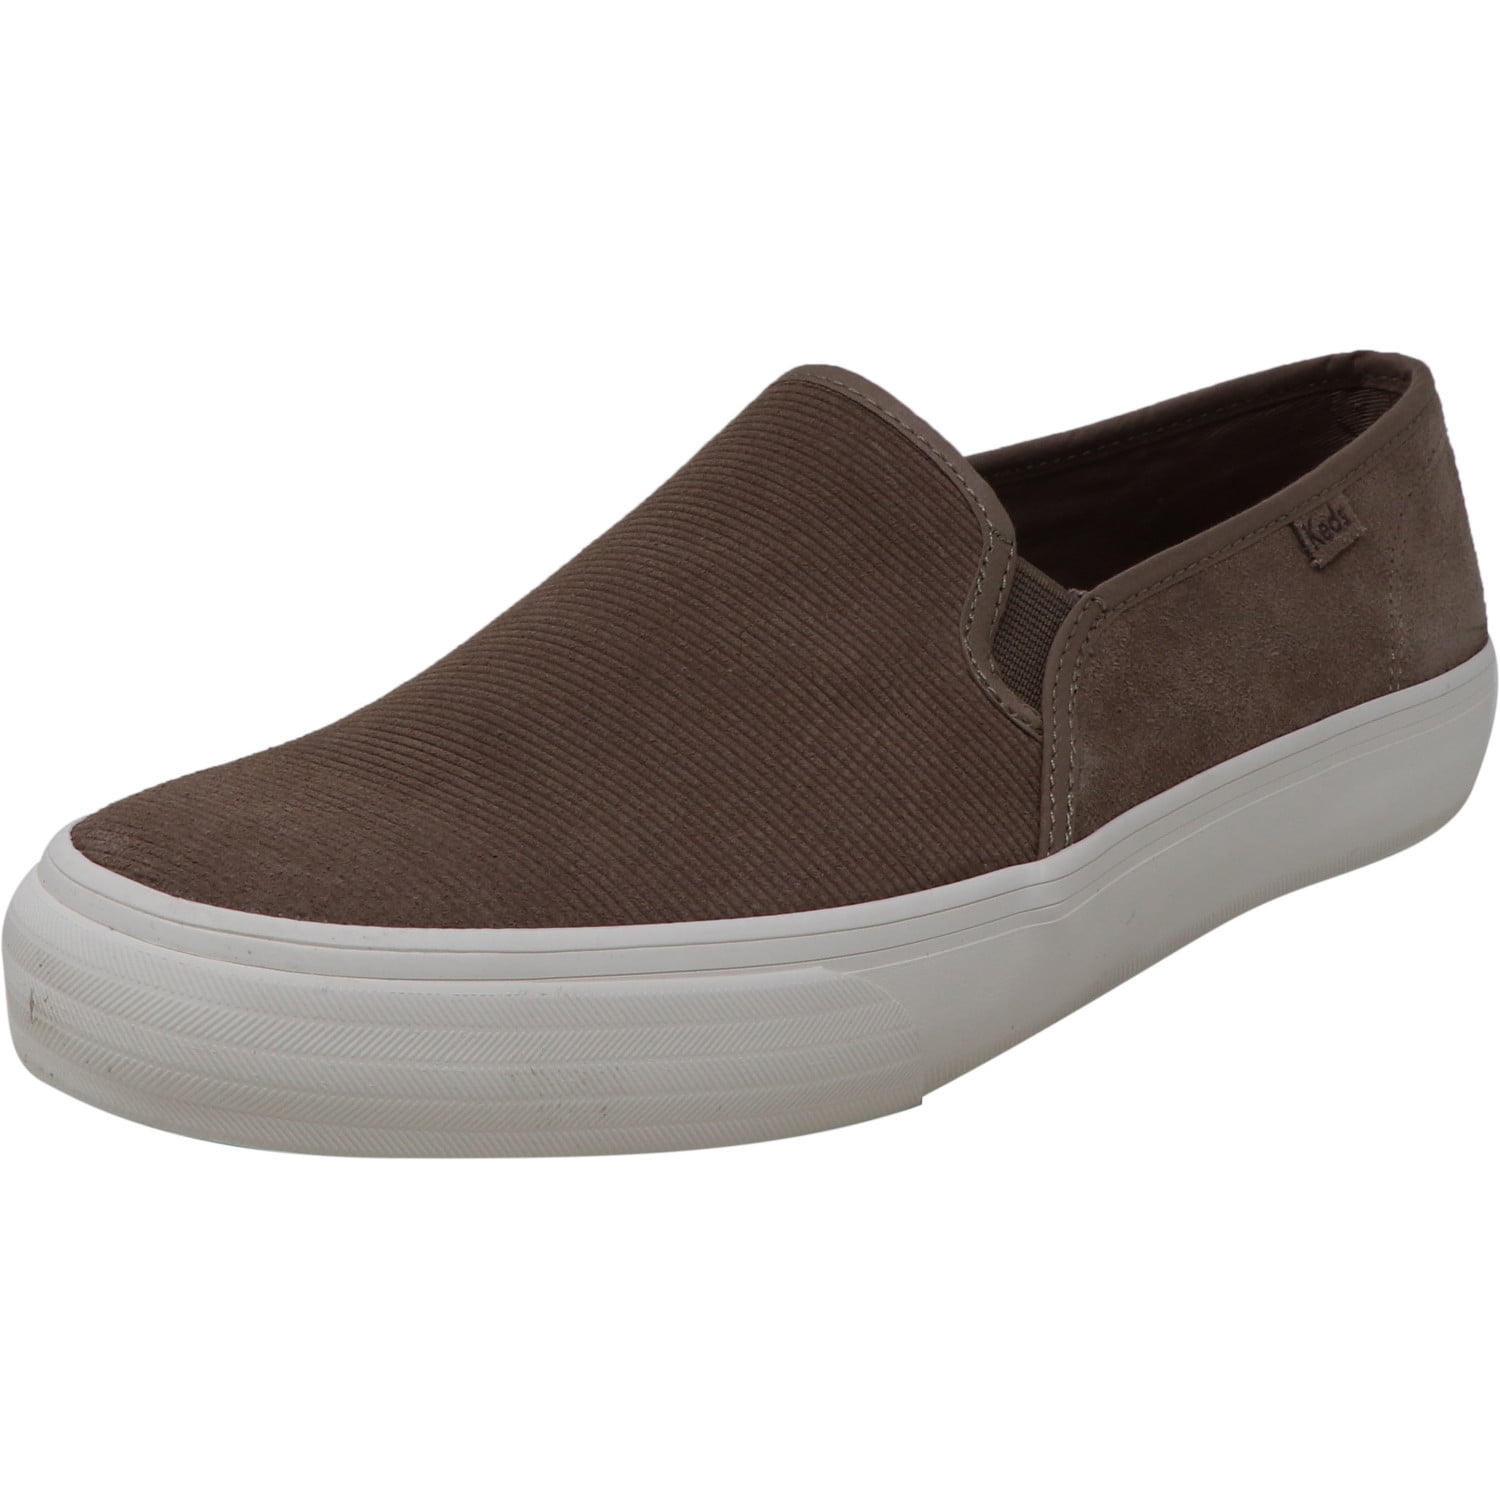 Keds Women's Double Decker Suede Taupe Ankle-High Slip-On Shoes - 6.5M ...